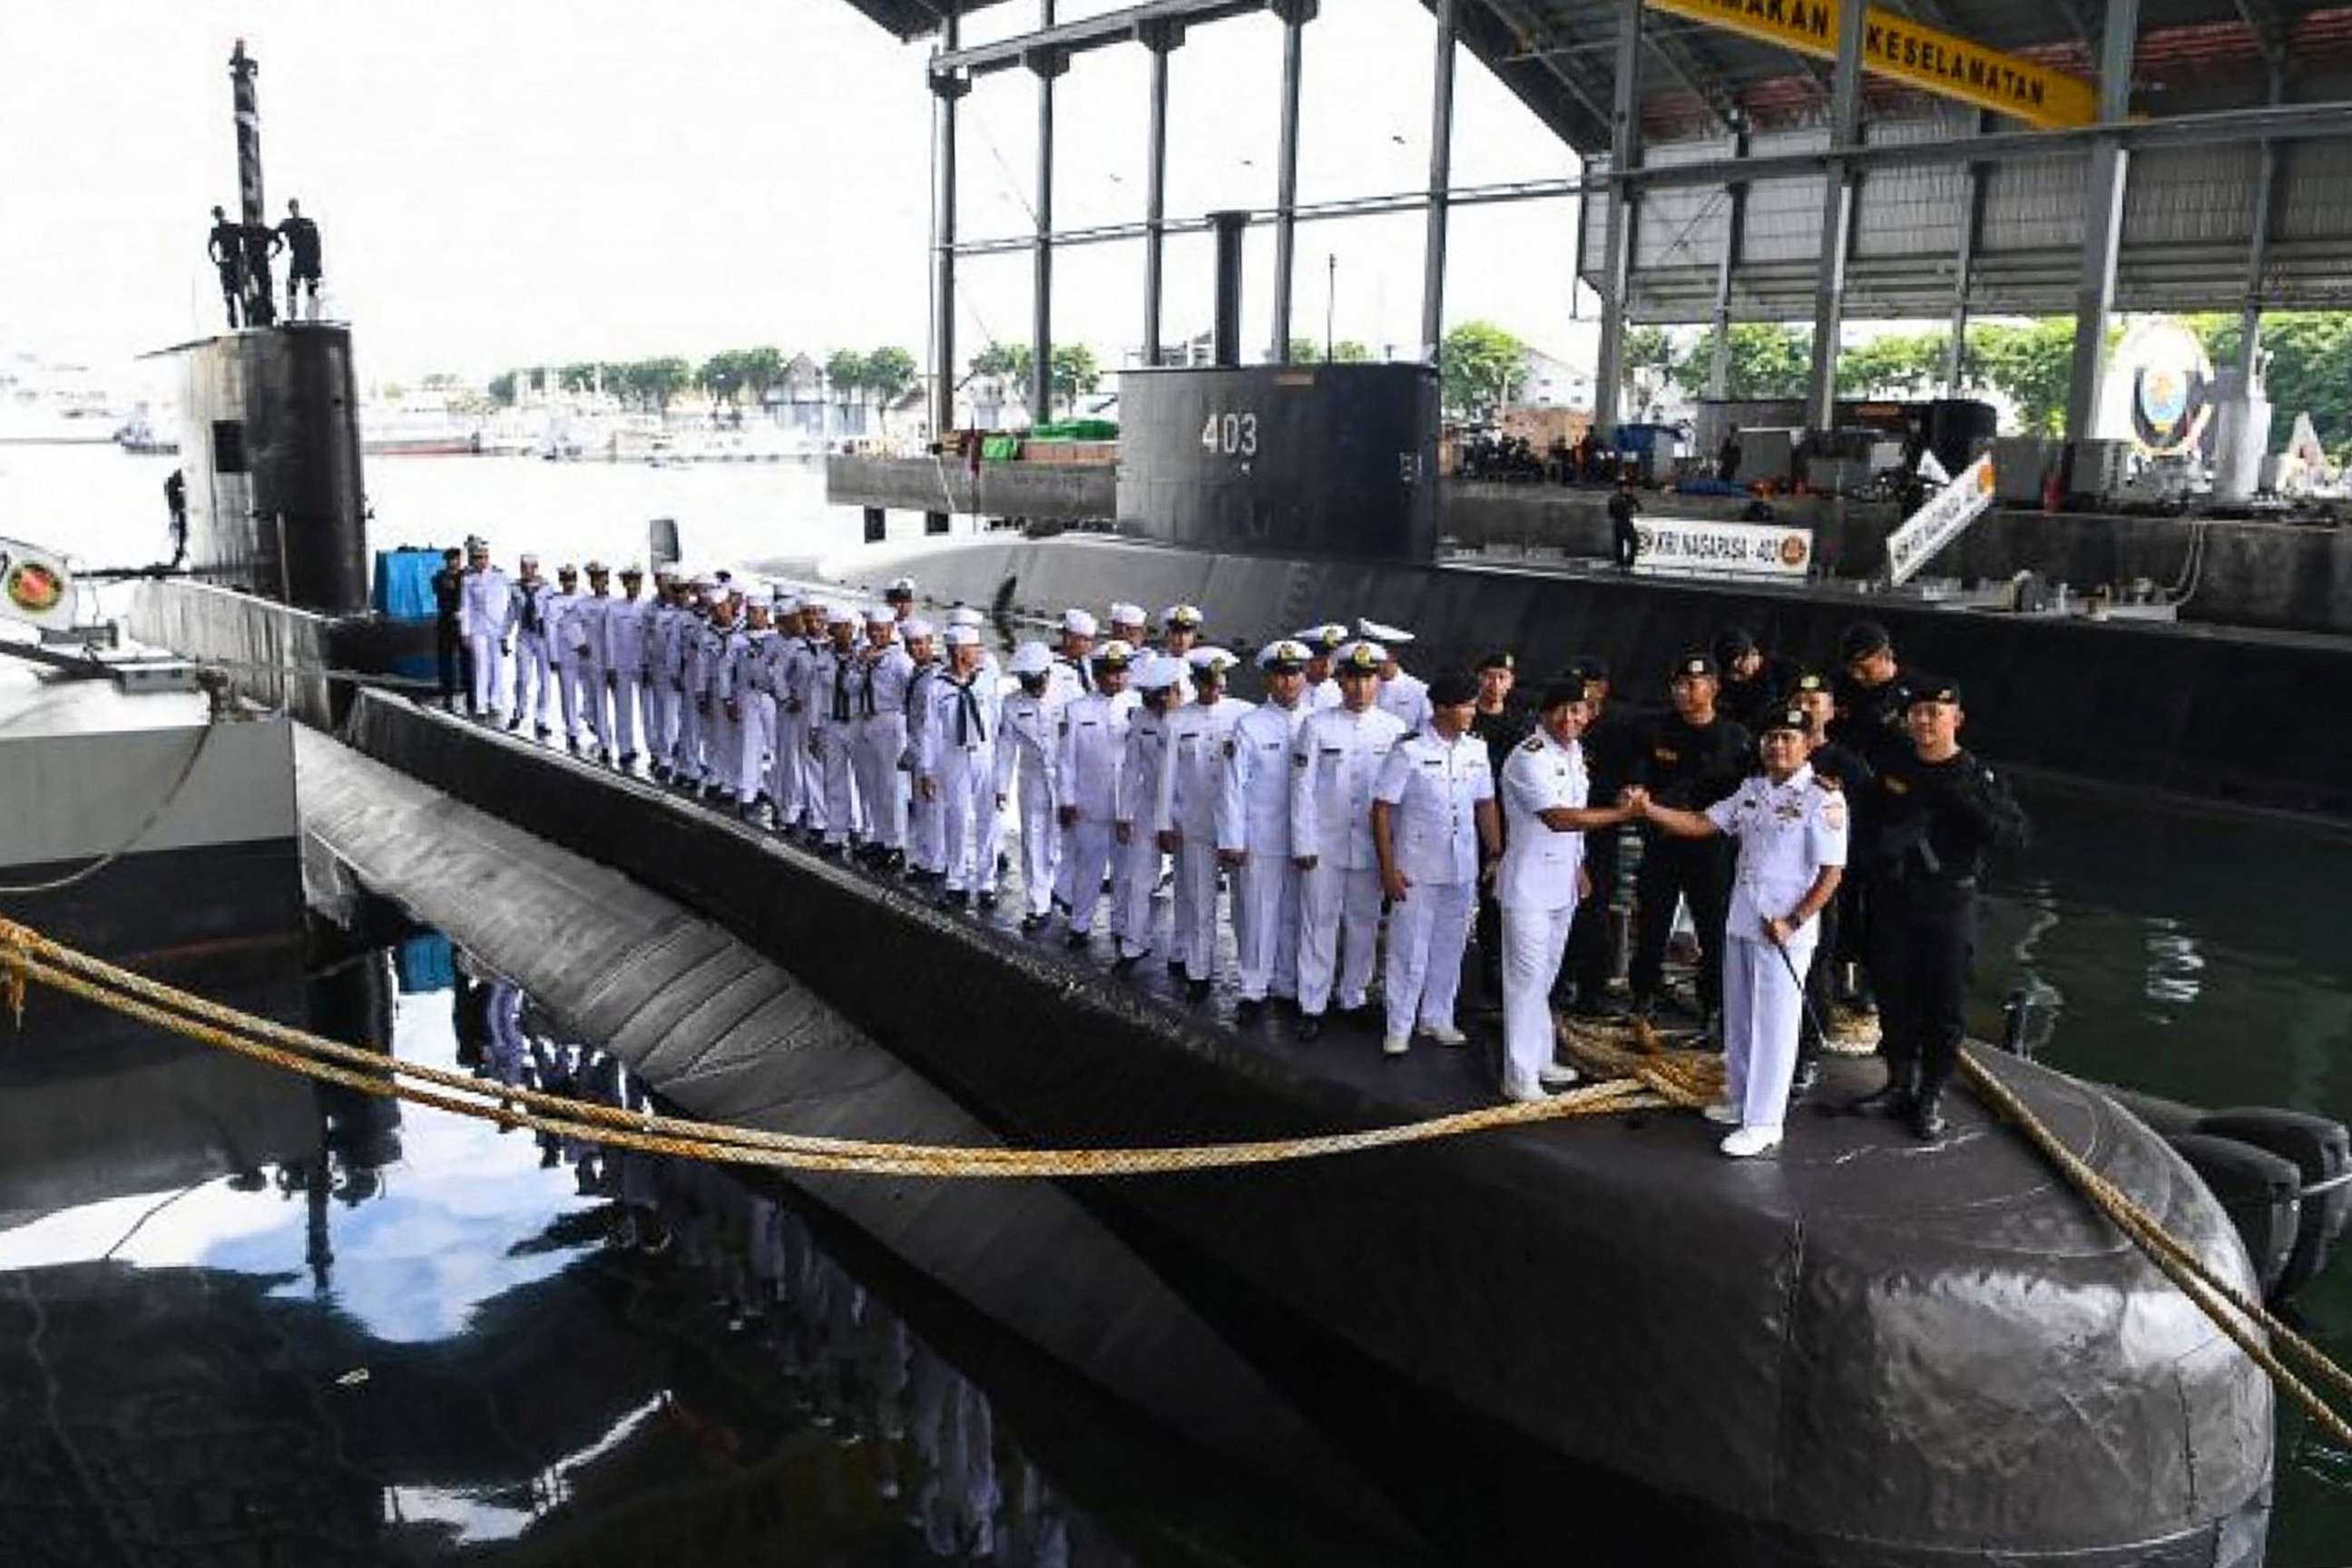 PHOTO: The crew and officers are seen onboard the Indonesian Cakra class submarine KRI Nanggala at the naval base in Surabaya, Feb. 20, 2019.